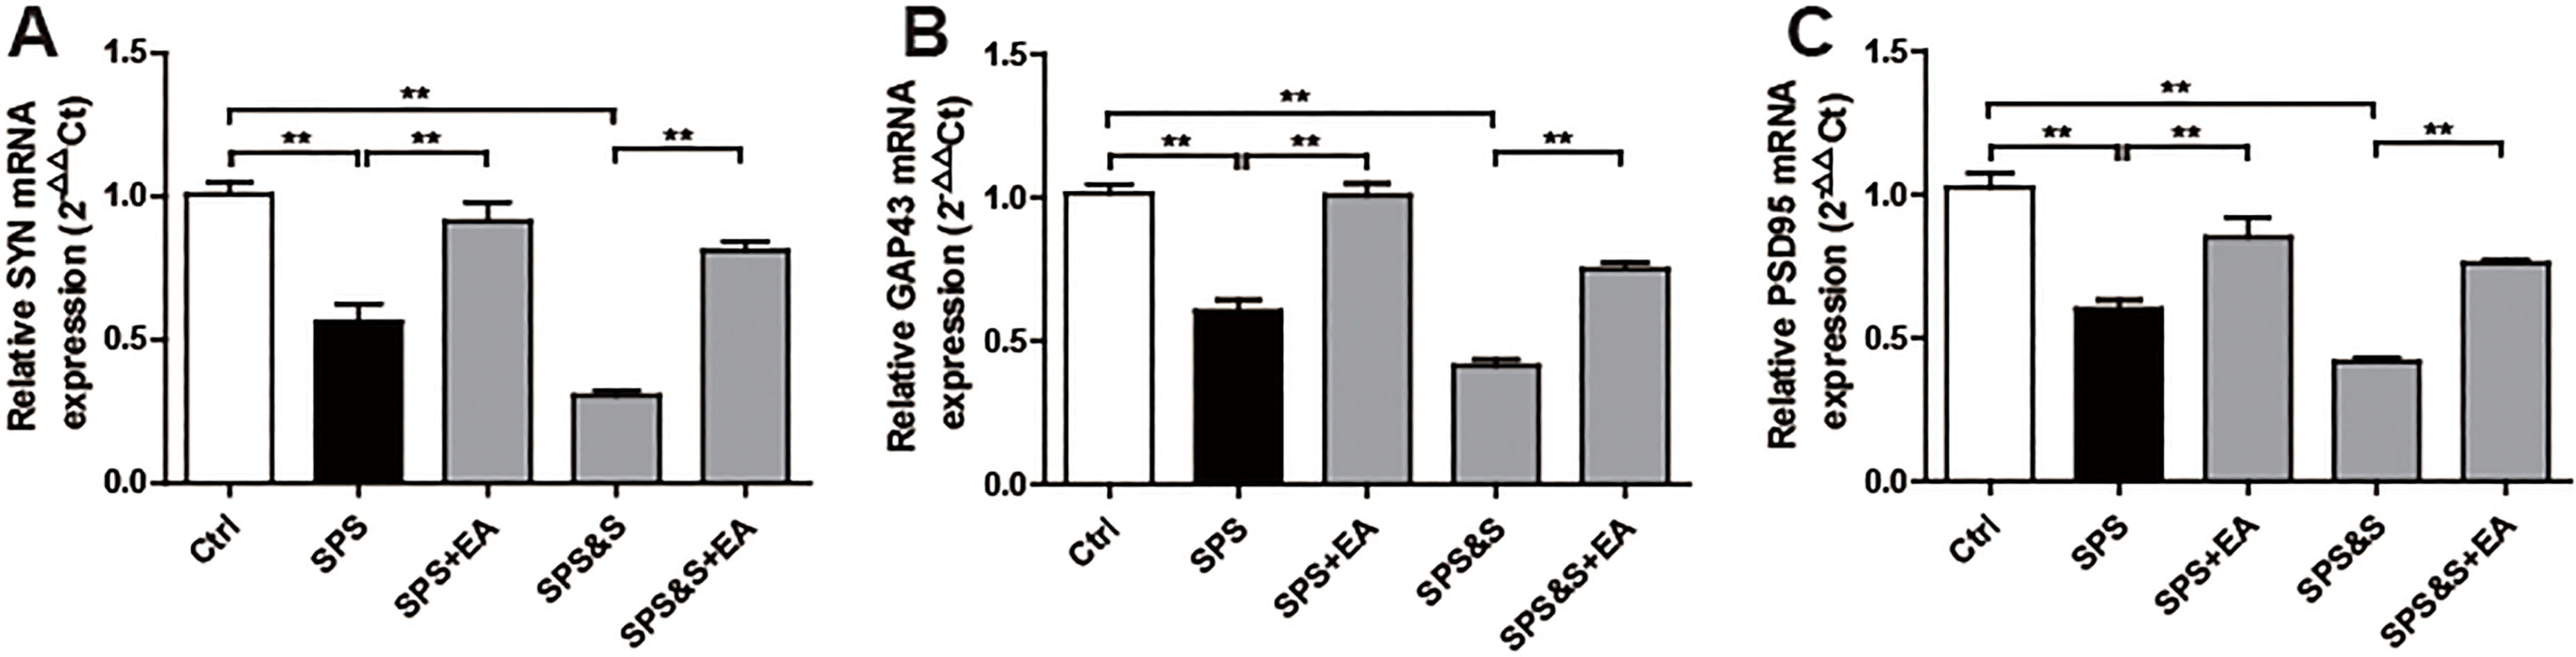 Effect of electroacupuncture on the mRNA expression of SYN, GAP43, PSD95 in amygdala from rats in the indicated groups. (A–C) mRNA expression of SYN, GAP43, PSD95 were analyzed by Real-time PCR. The results were presented as mean ± SD (n= 3). p*< 0.05, p**< 0.01.